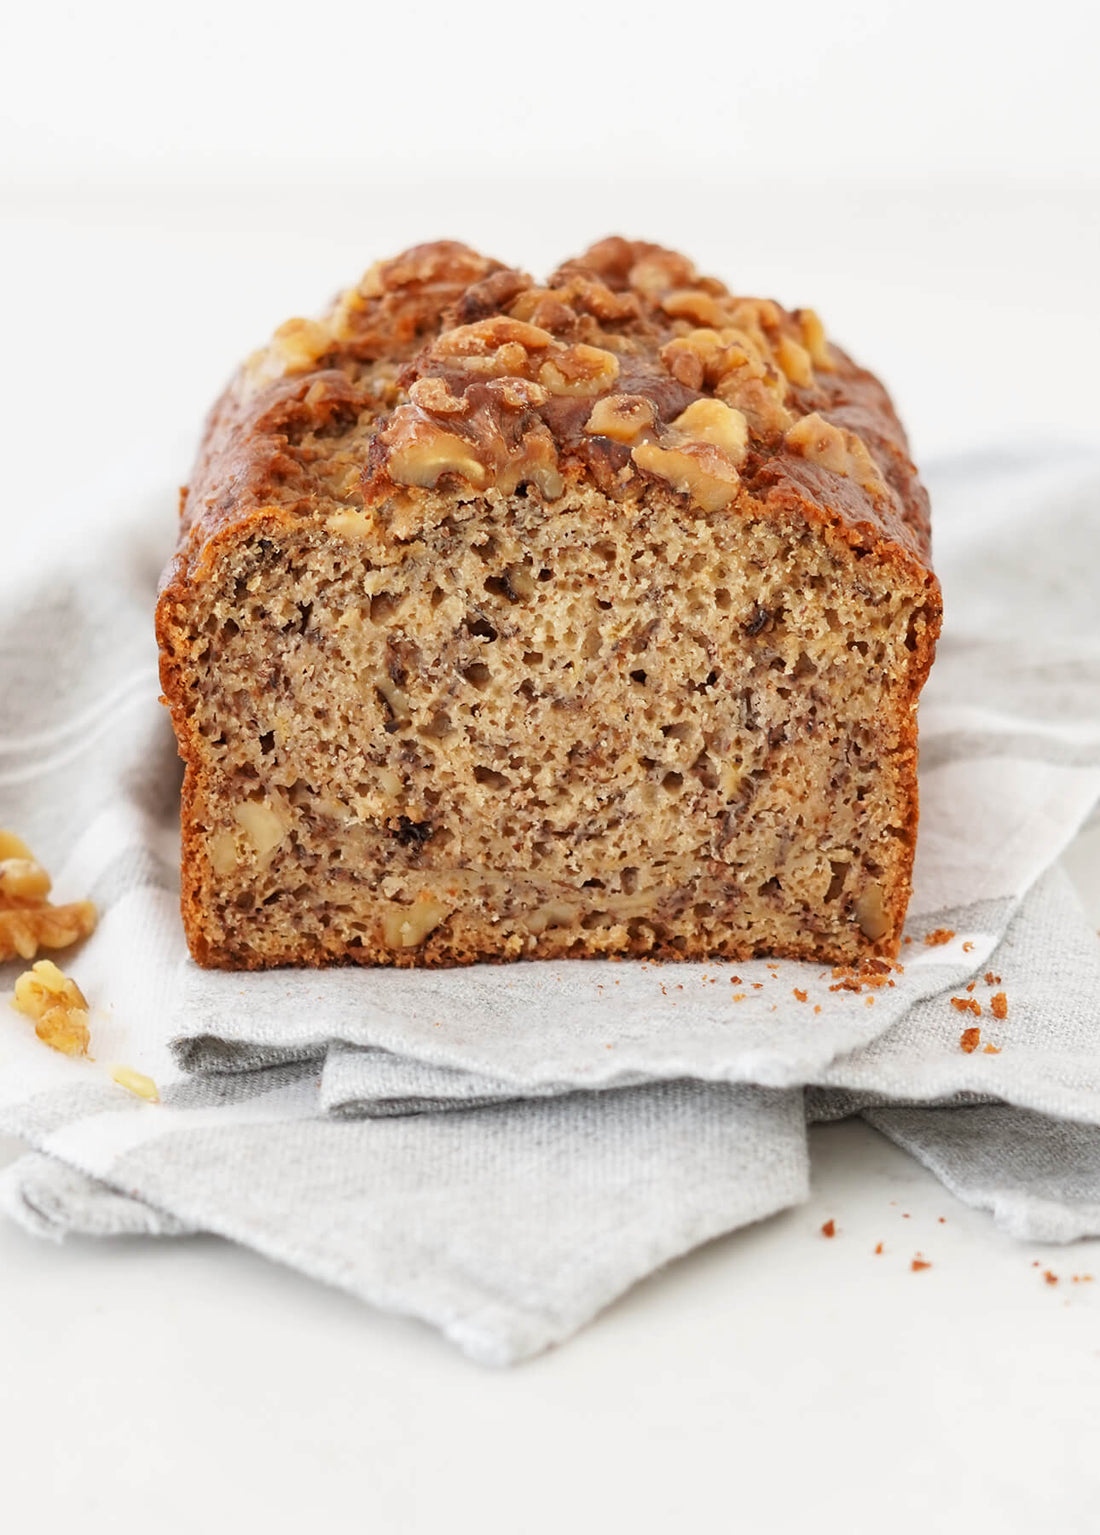 How to Make the Perfect Banana Bread